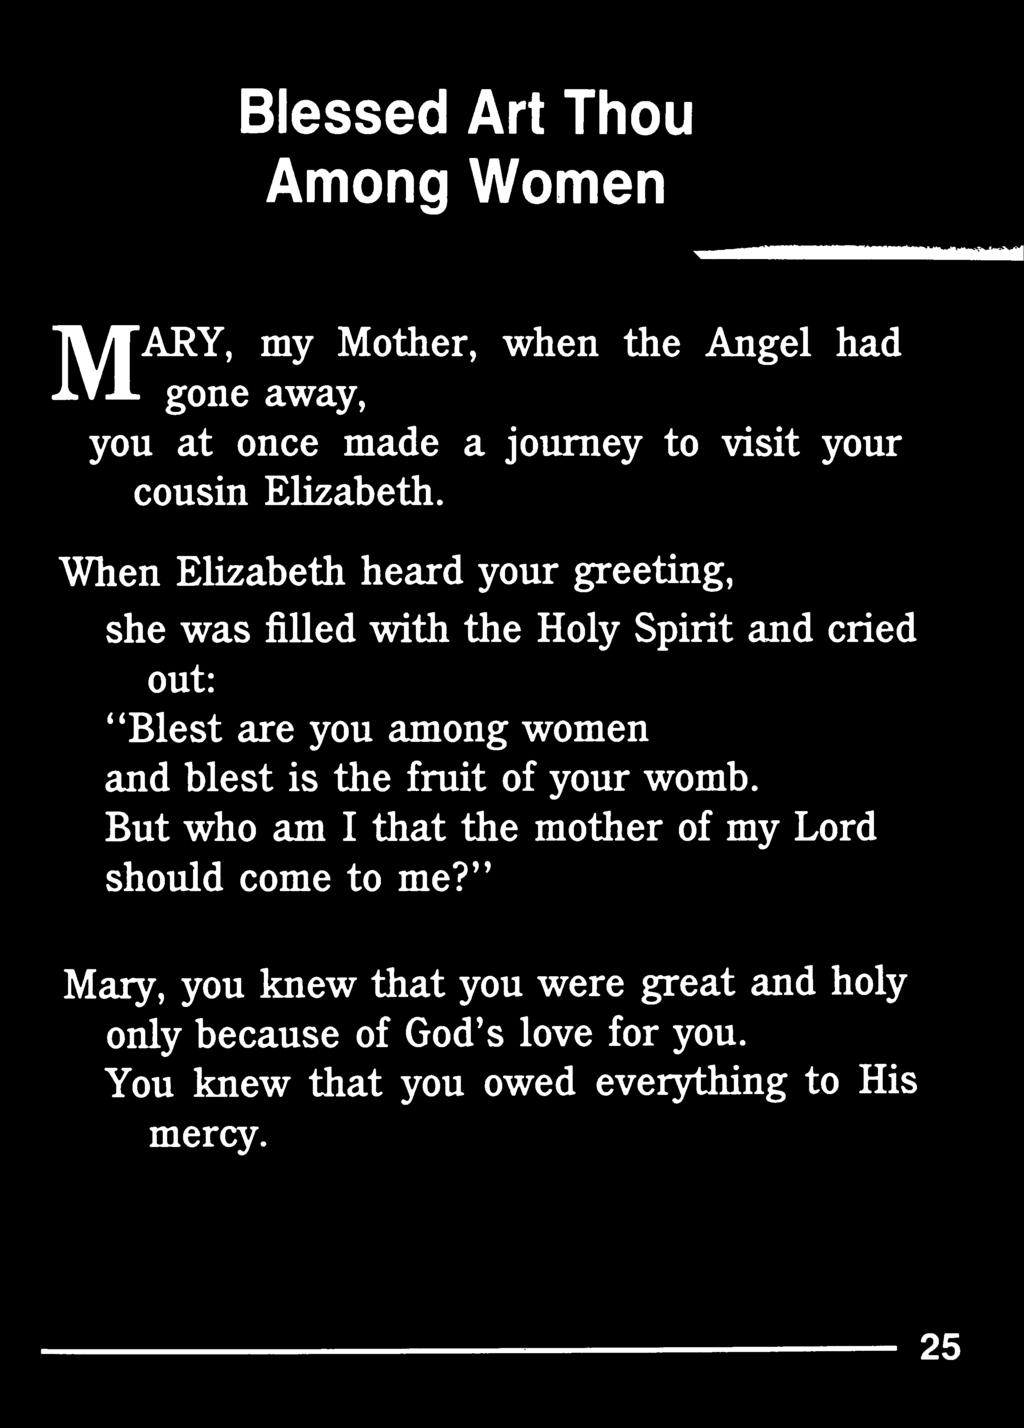 When Elizabeth heard your greeting, she was filled with the Holy Spirit and cried out: **Blest are you among women and